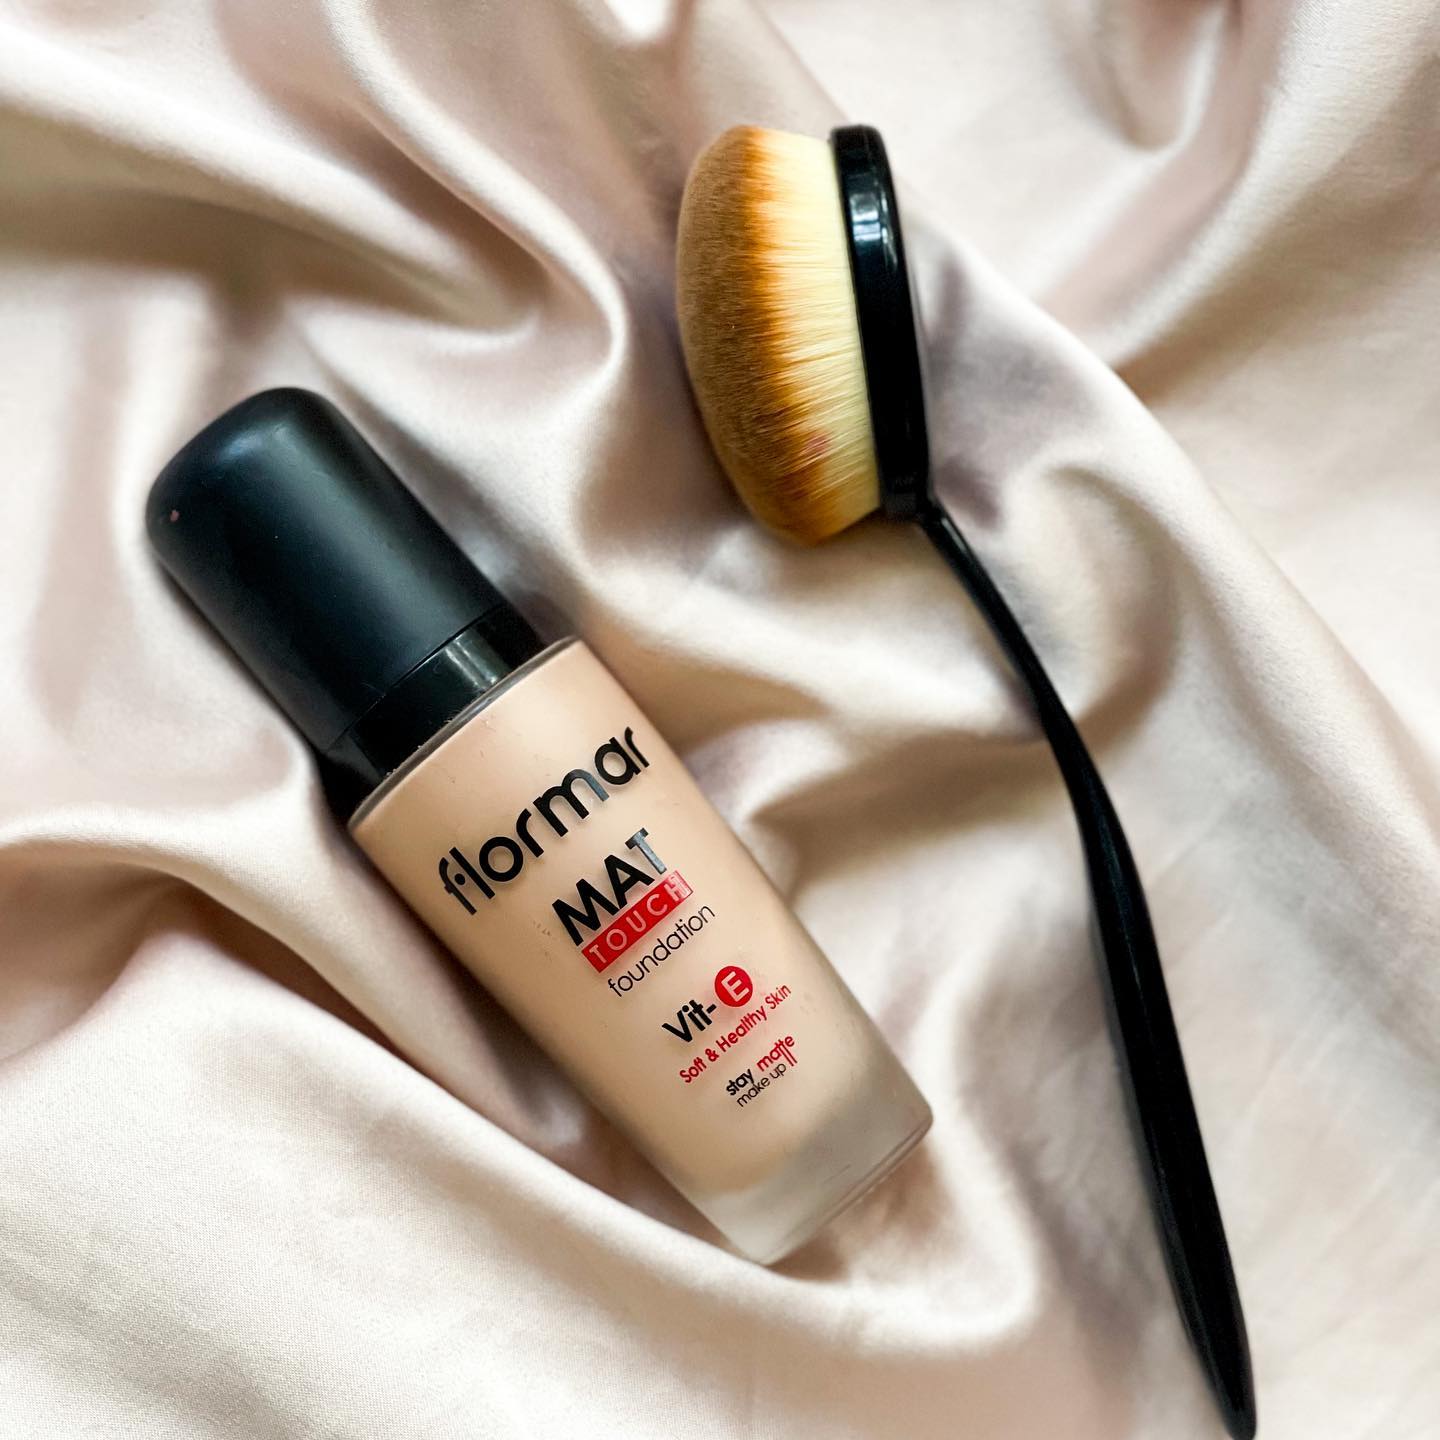 Flormar Pakistan - FULL COVERAGE? Choose Mat Touch or Perfect Coverage  foundation for long lasting flawless base 🙌🏻🏆 Price:Rs.2,485/- #flormar # foundation #mattouch #perfectcoverage #fullcoverage #mattefoundation  #fullcoveragefoundation